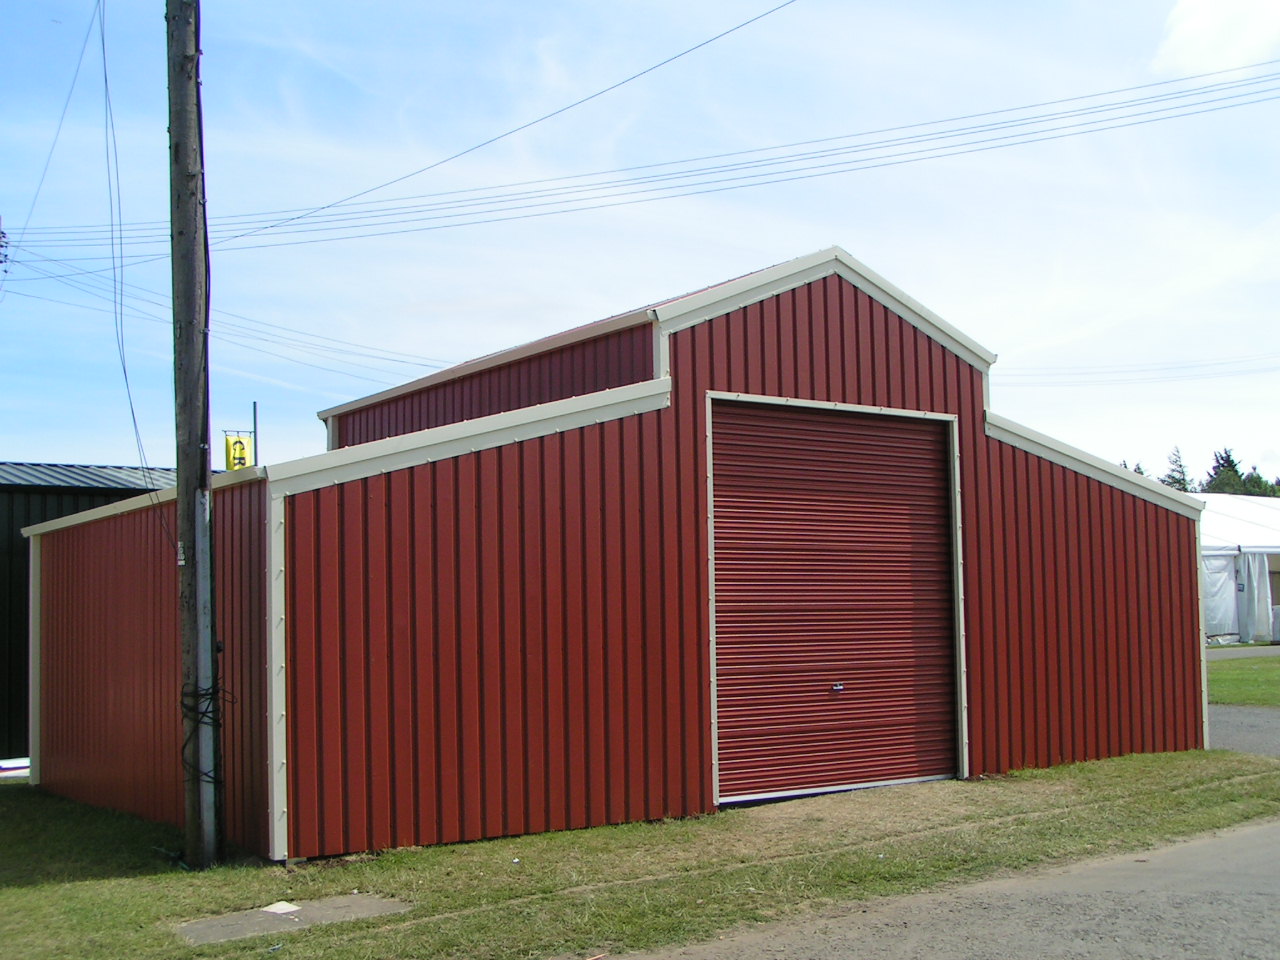  sheds steel church buildings storage shed kits barns buildings garages